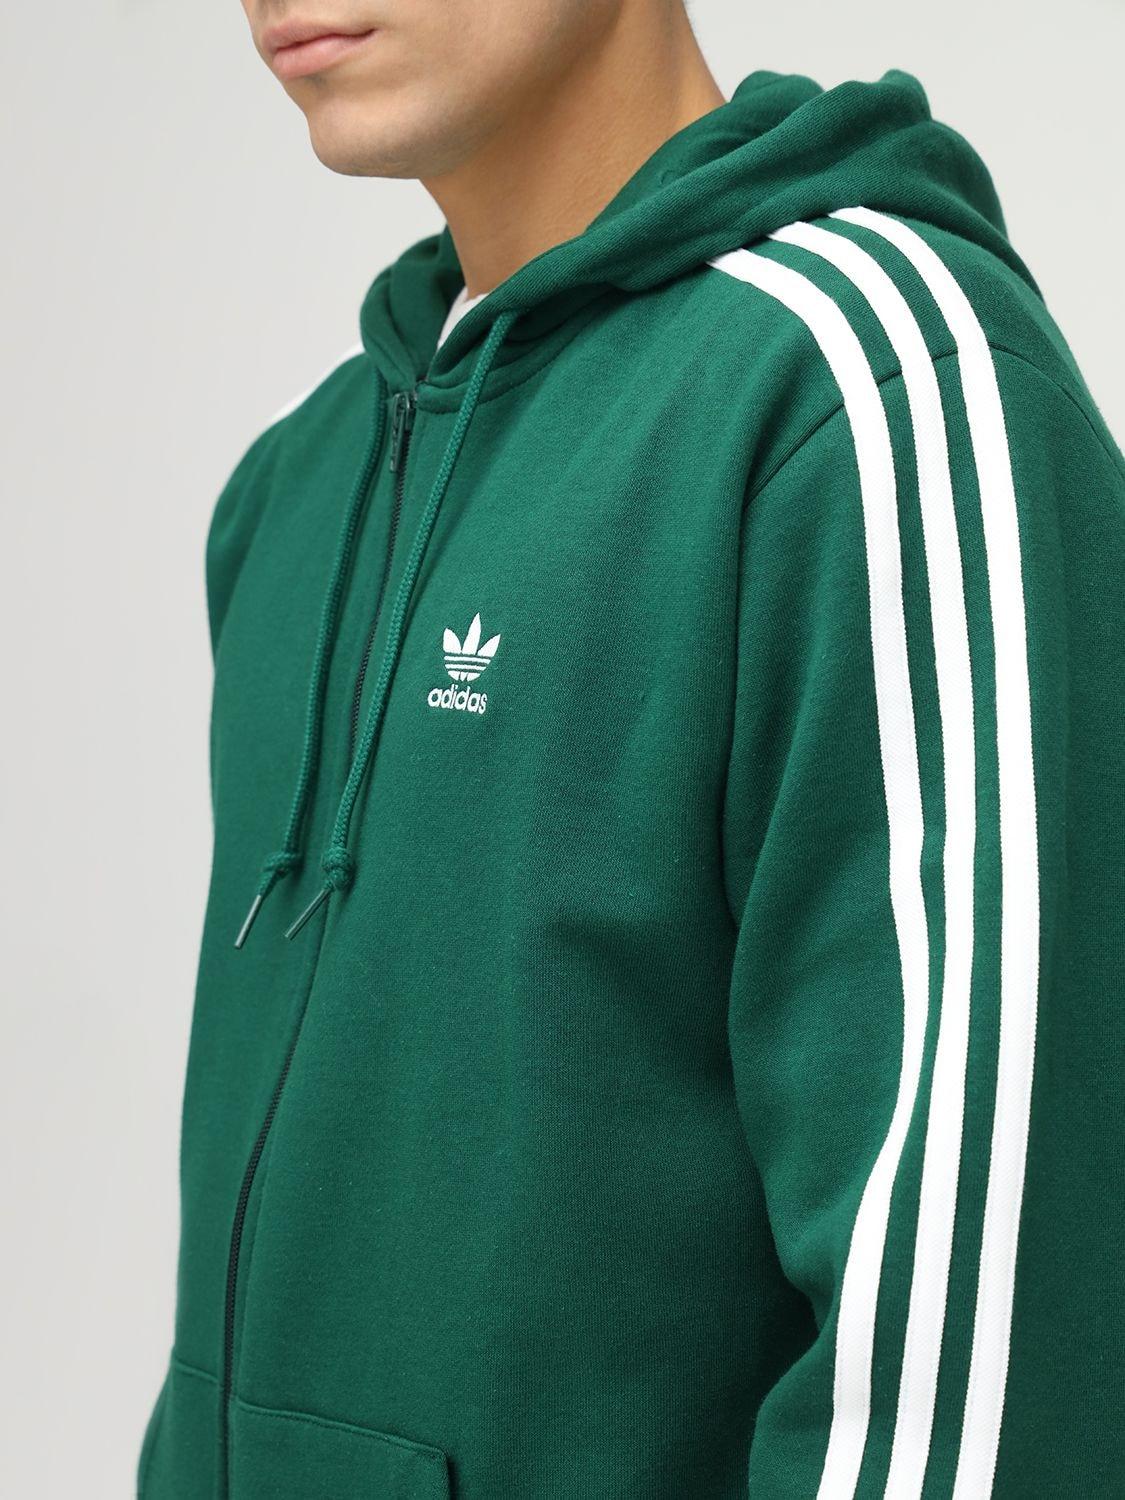 adidas Originals 3-stripes Fz Top in for | Lyst